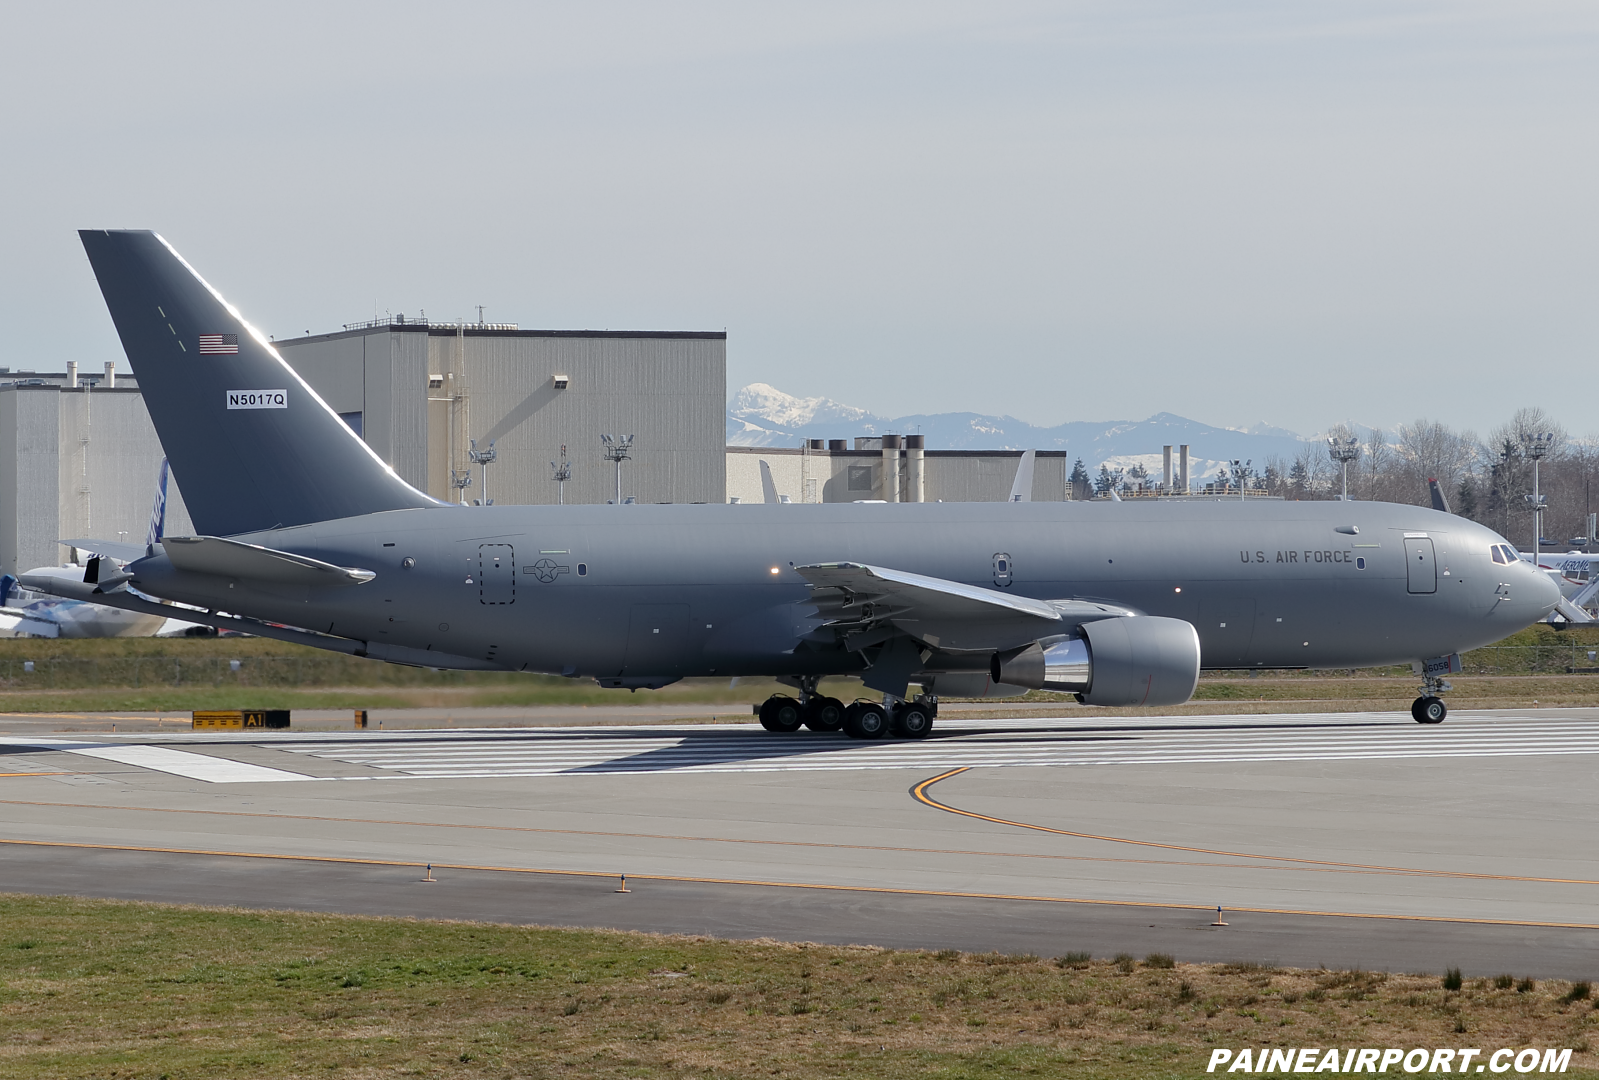 KC-46A 19-46058 at KPAE Paine Field